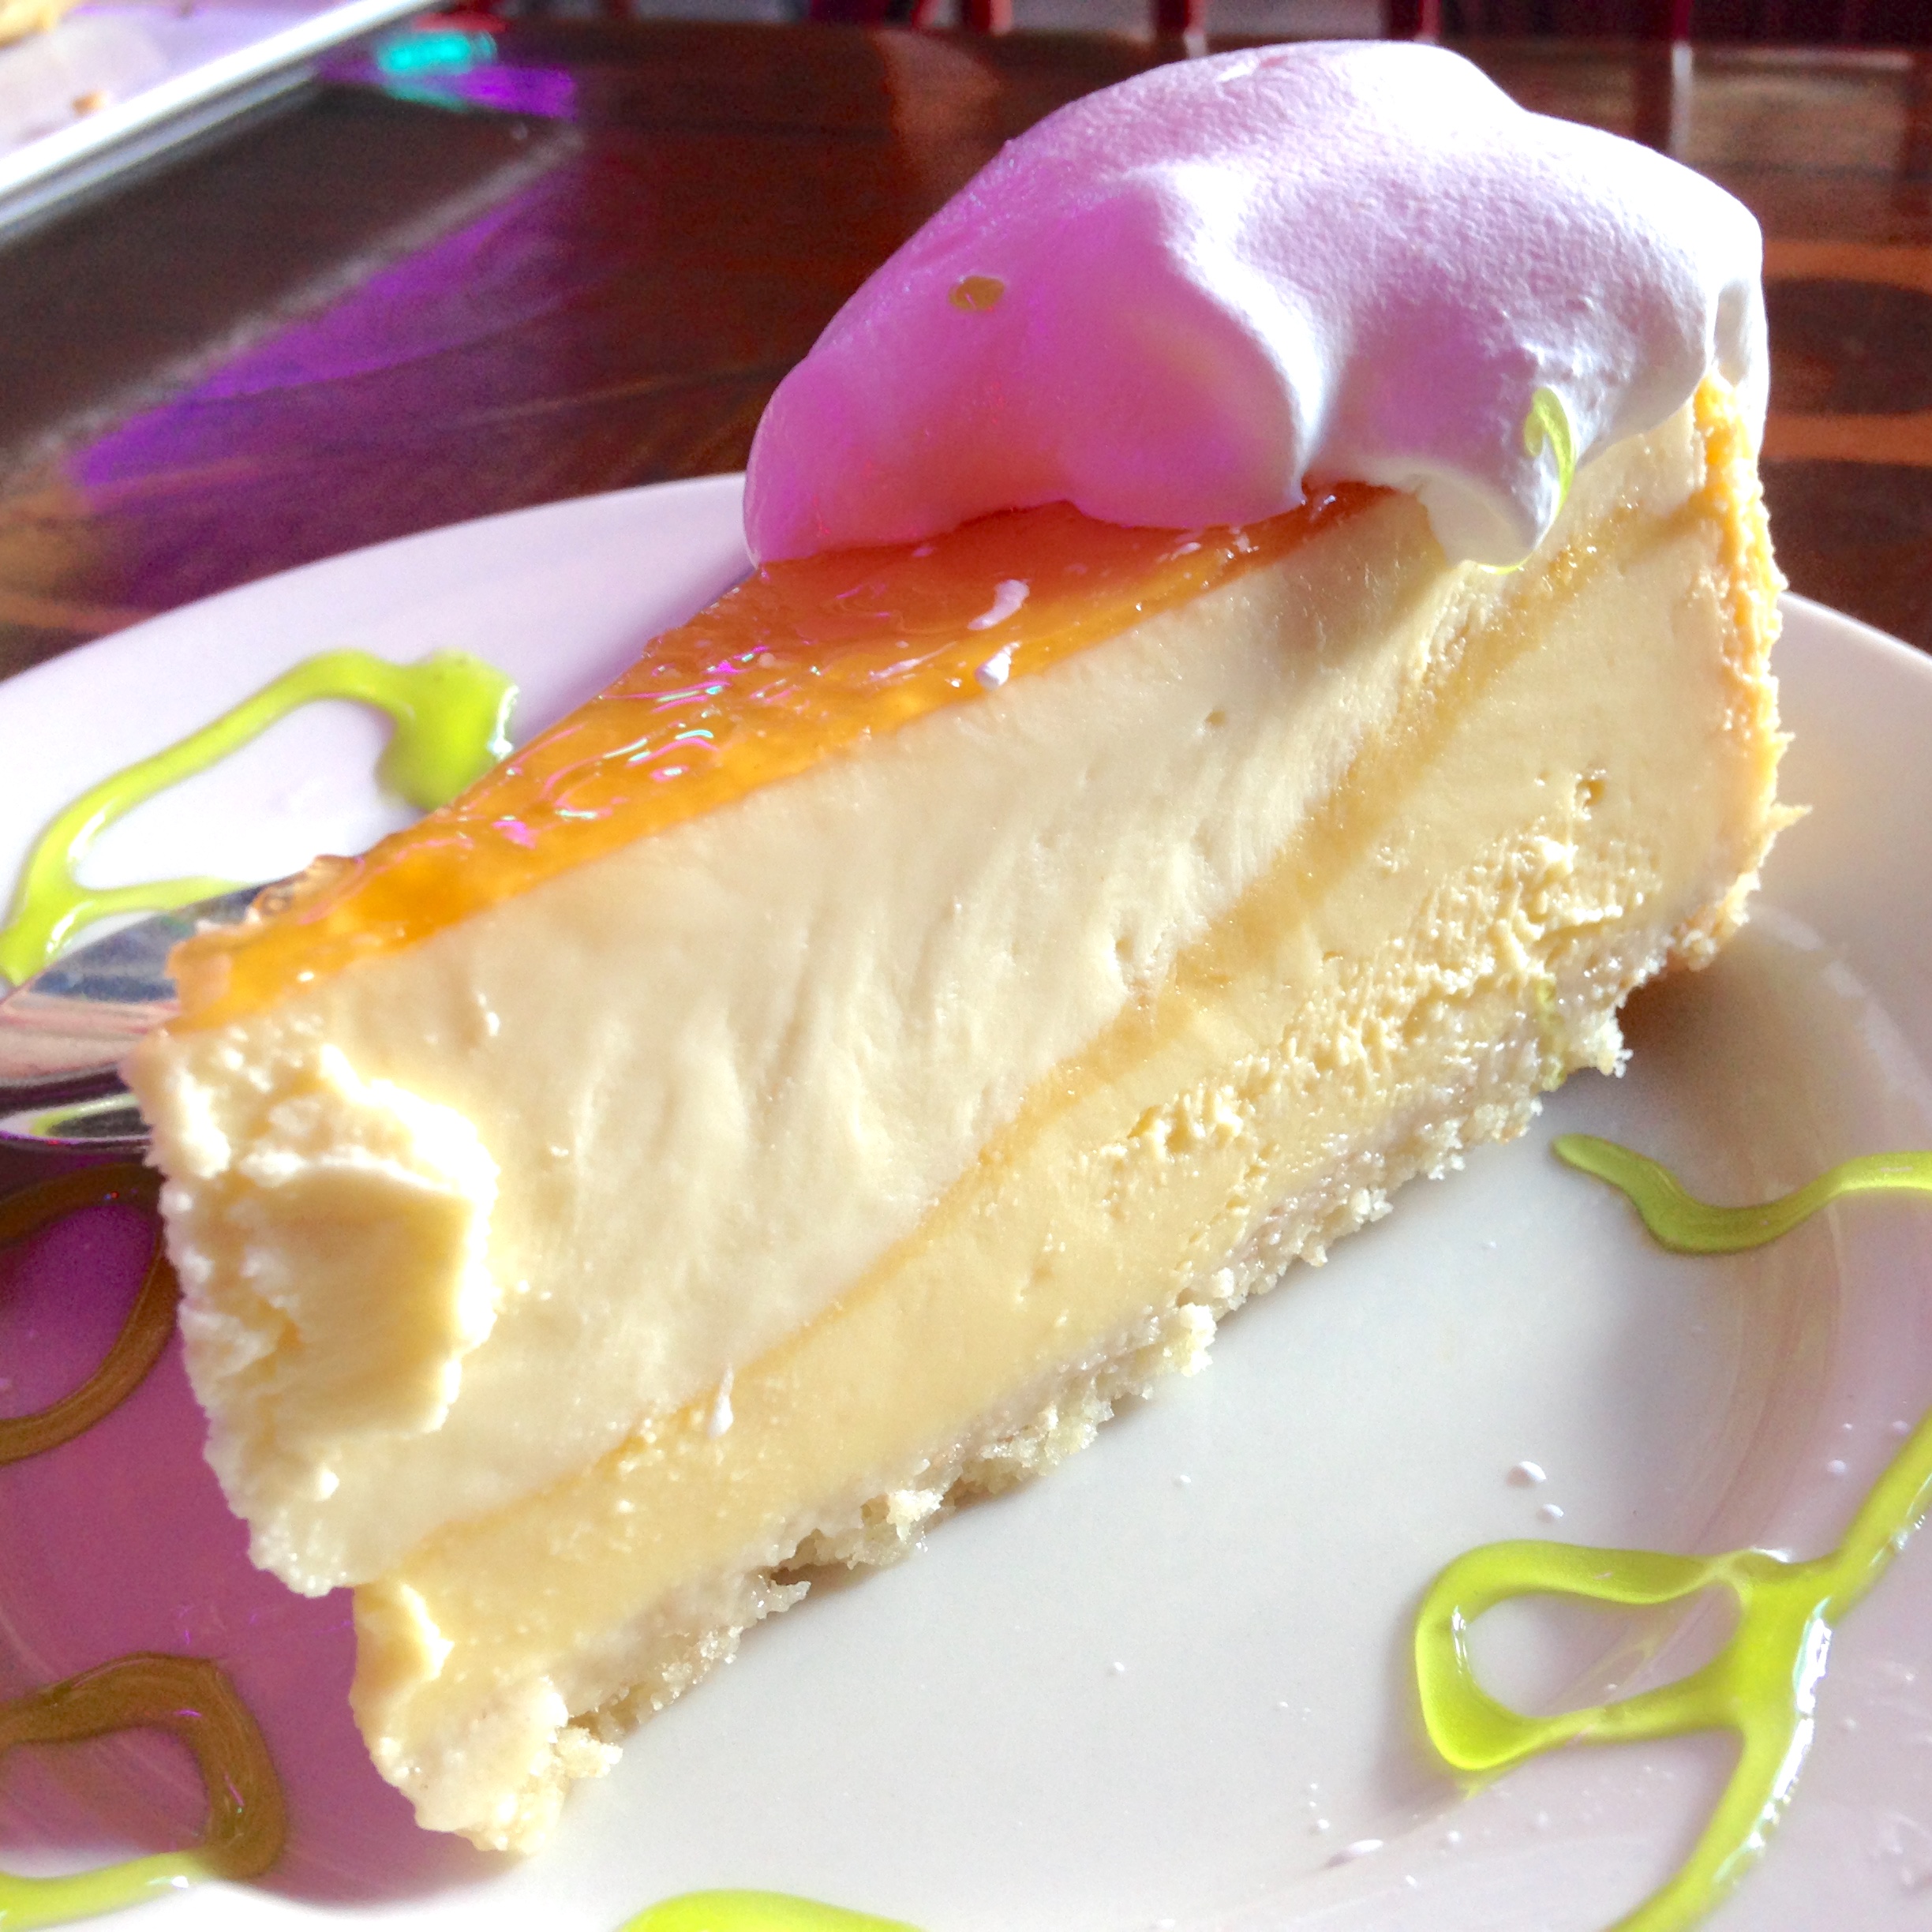 Mango Cheesecake from The Fish House in Miami, Florida